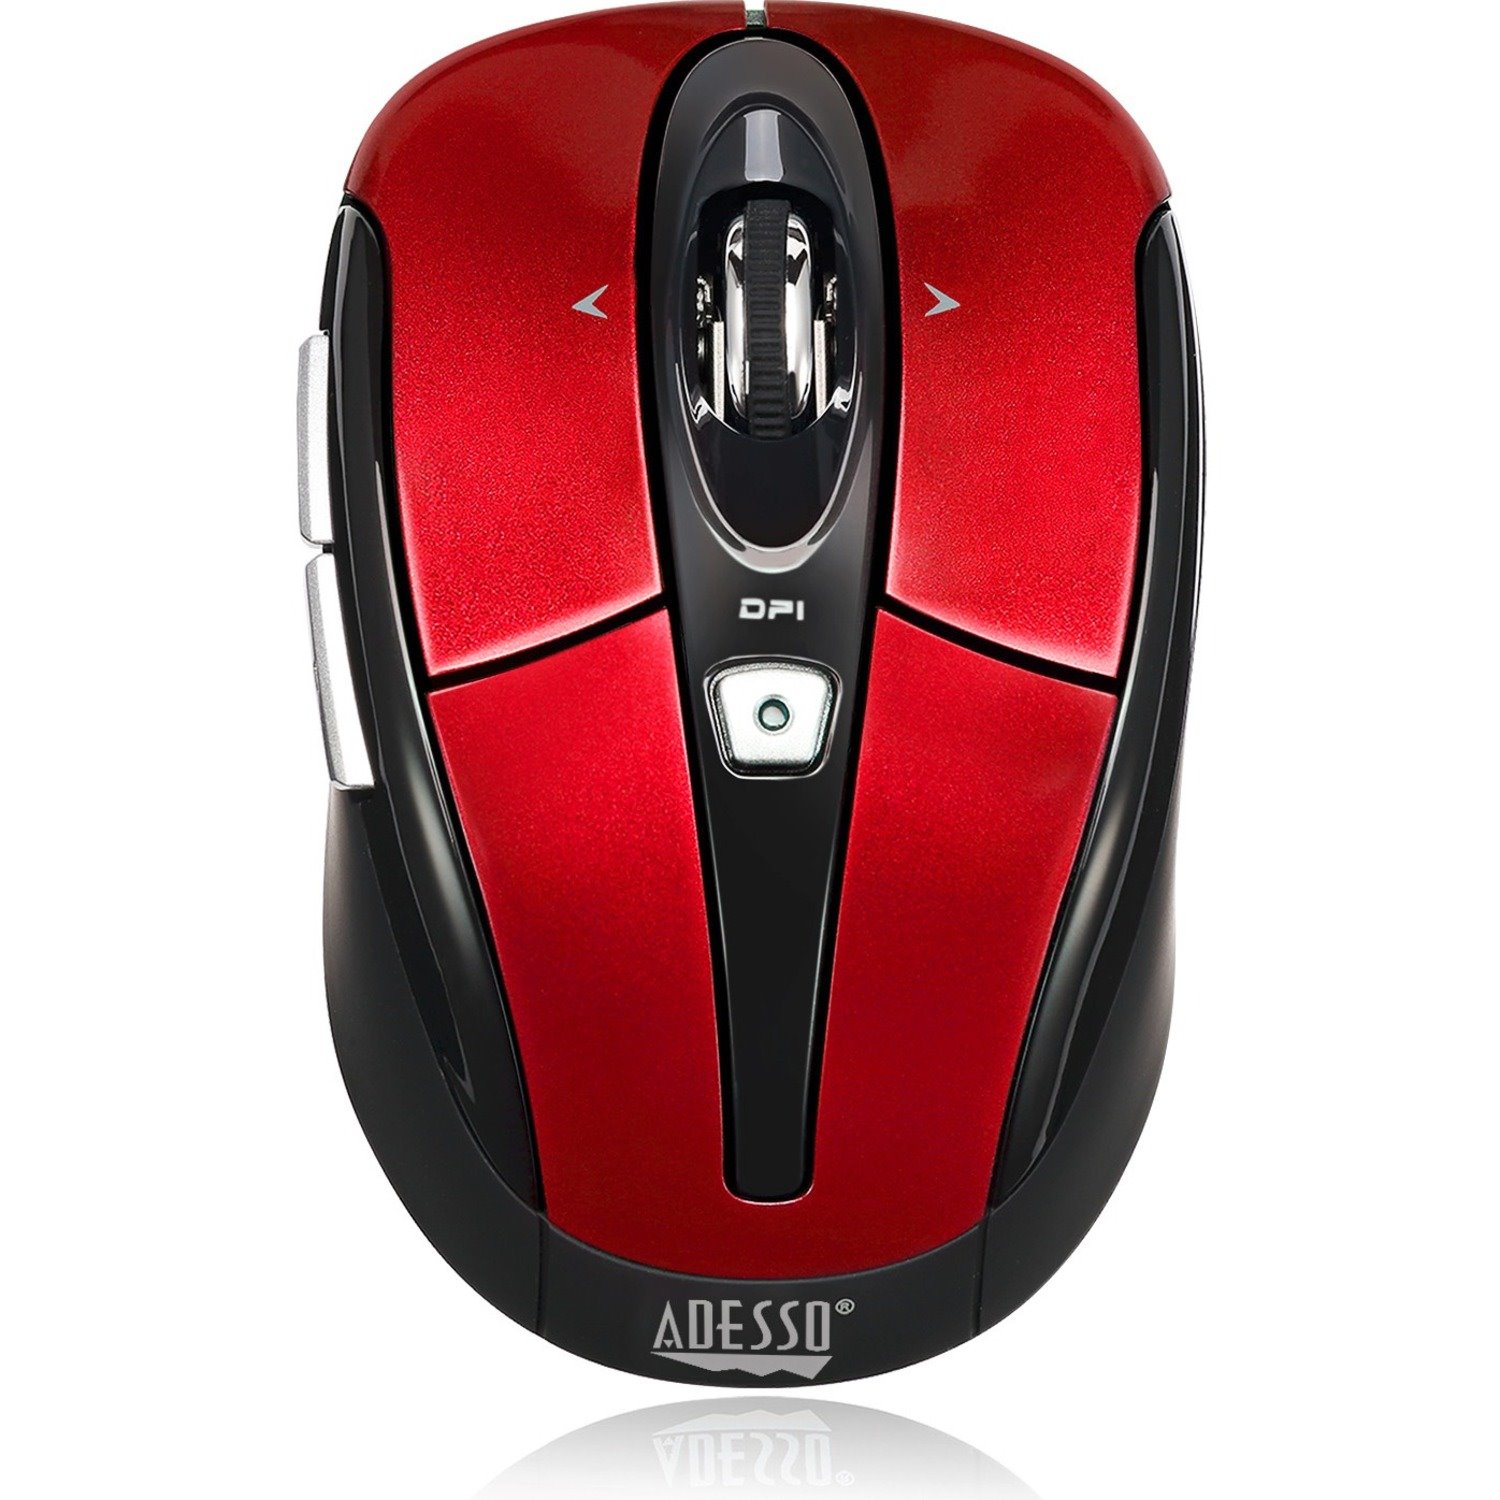 Adesso iMouse S60R Mouse - Radio Frequency - USB - Optical - 6 Button(s) - Red